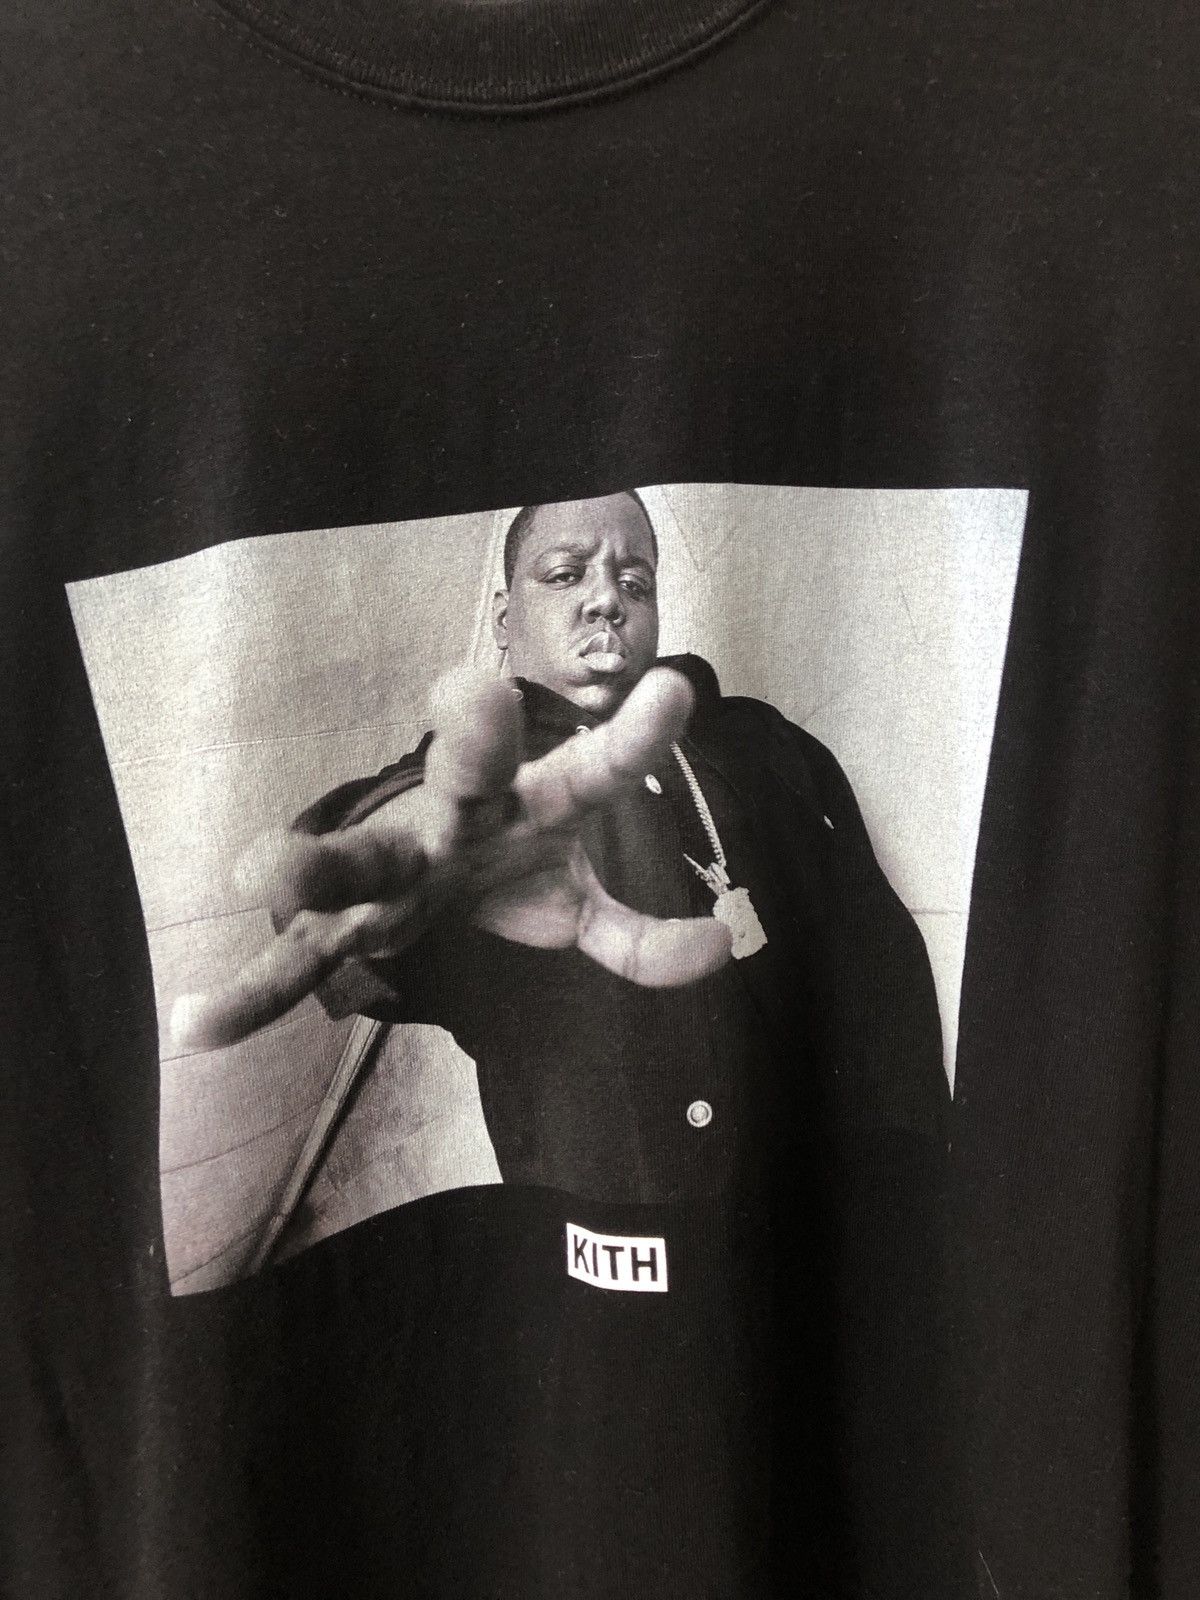 Kith Kith x Biggie - Gimme The Loot L/S Tee Black | Grailed